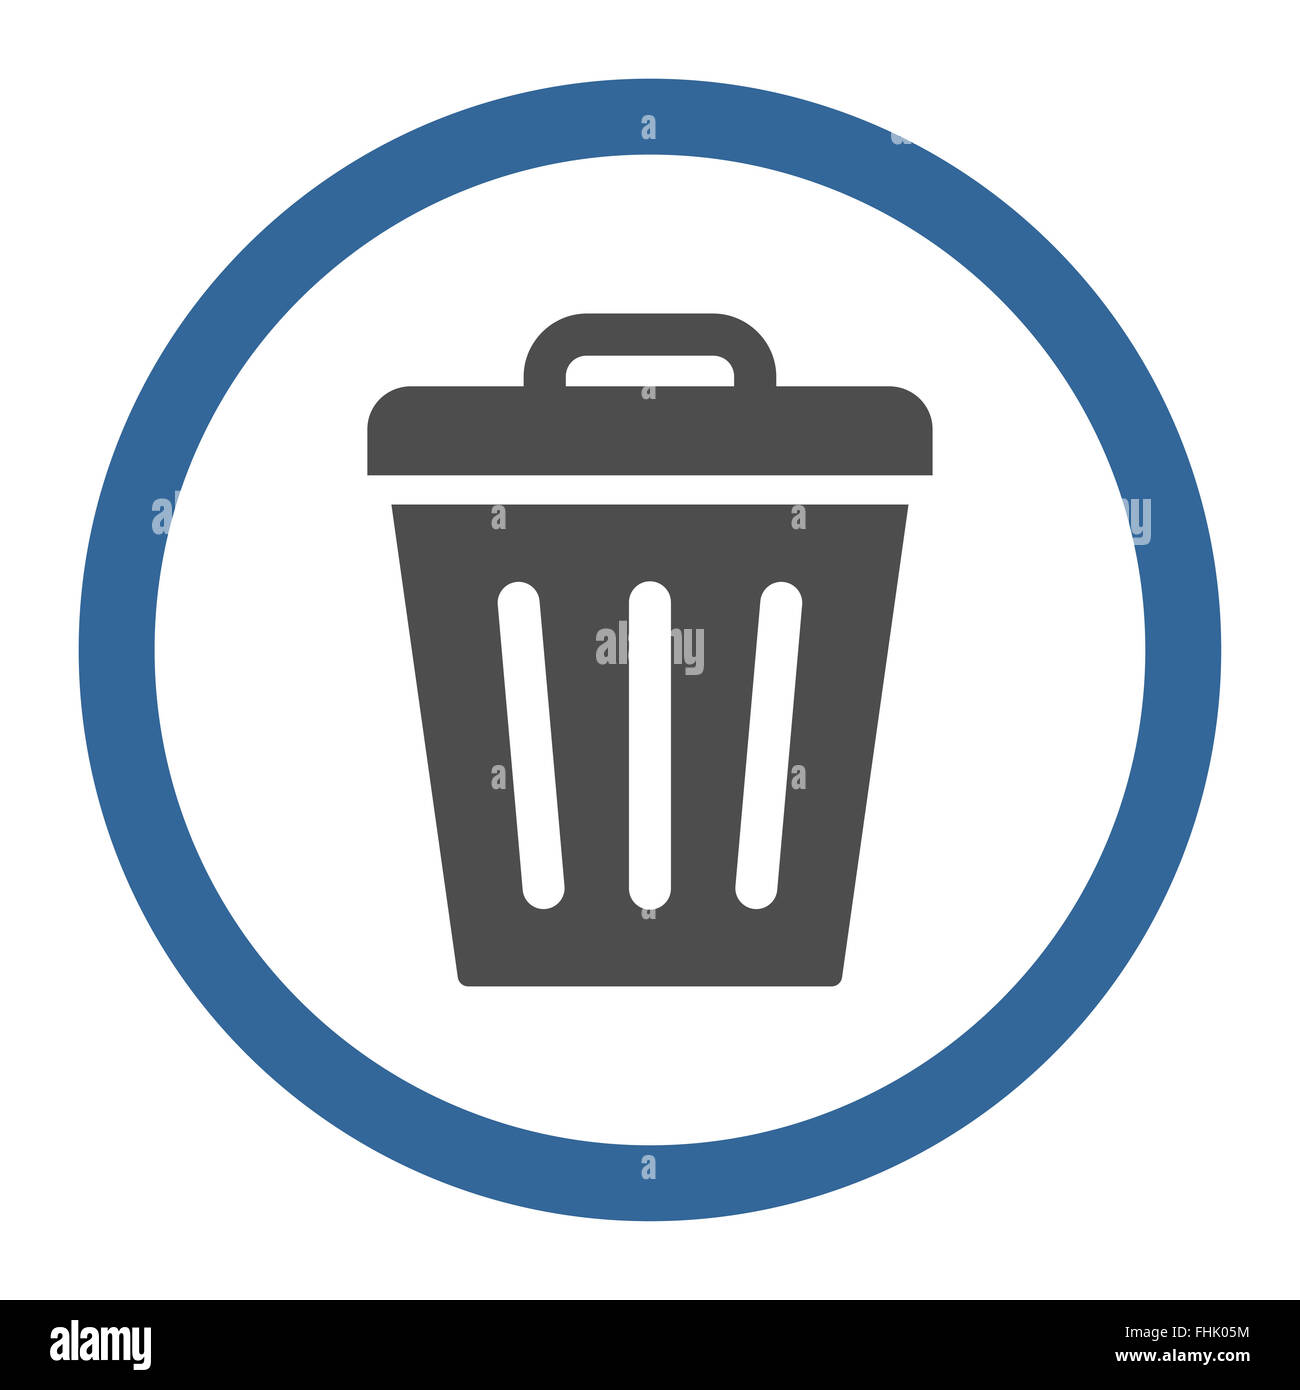 Trash Can flat cobalt and gray colors rounded raster icon Stock Photo